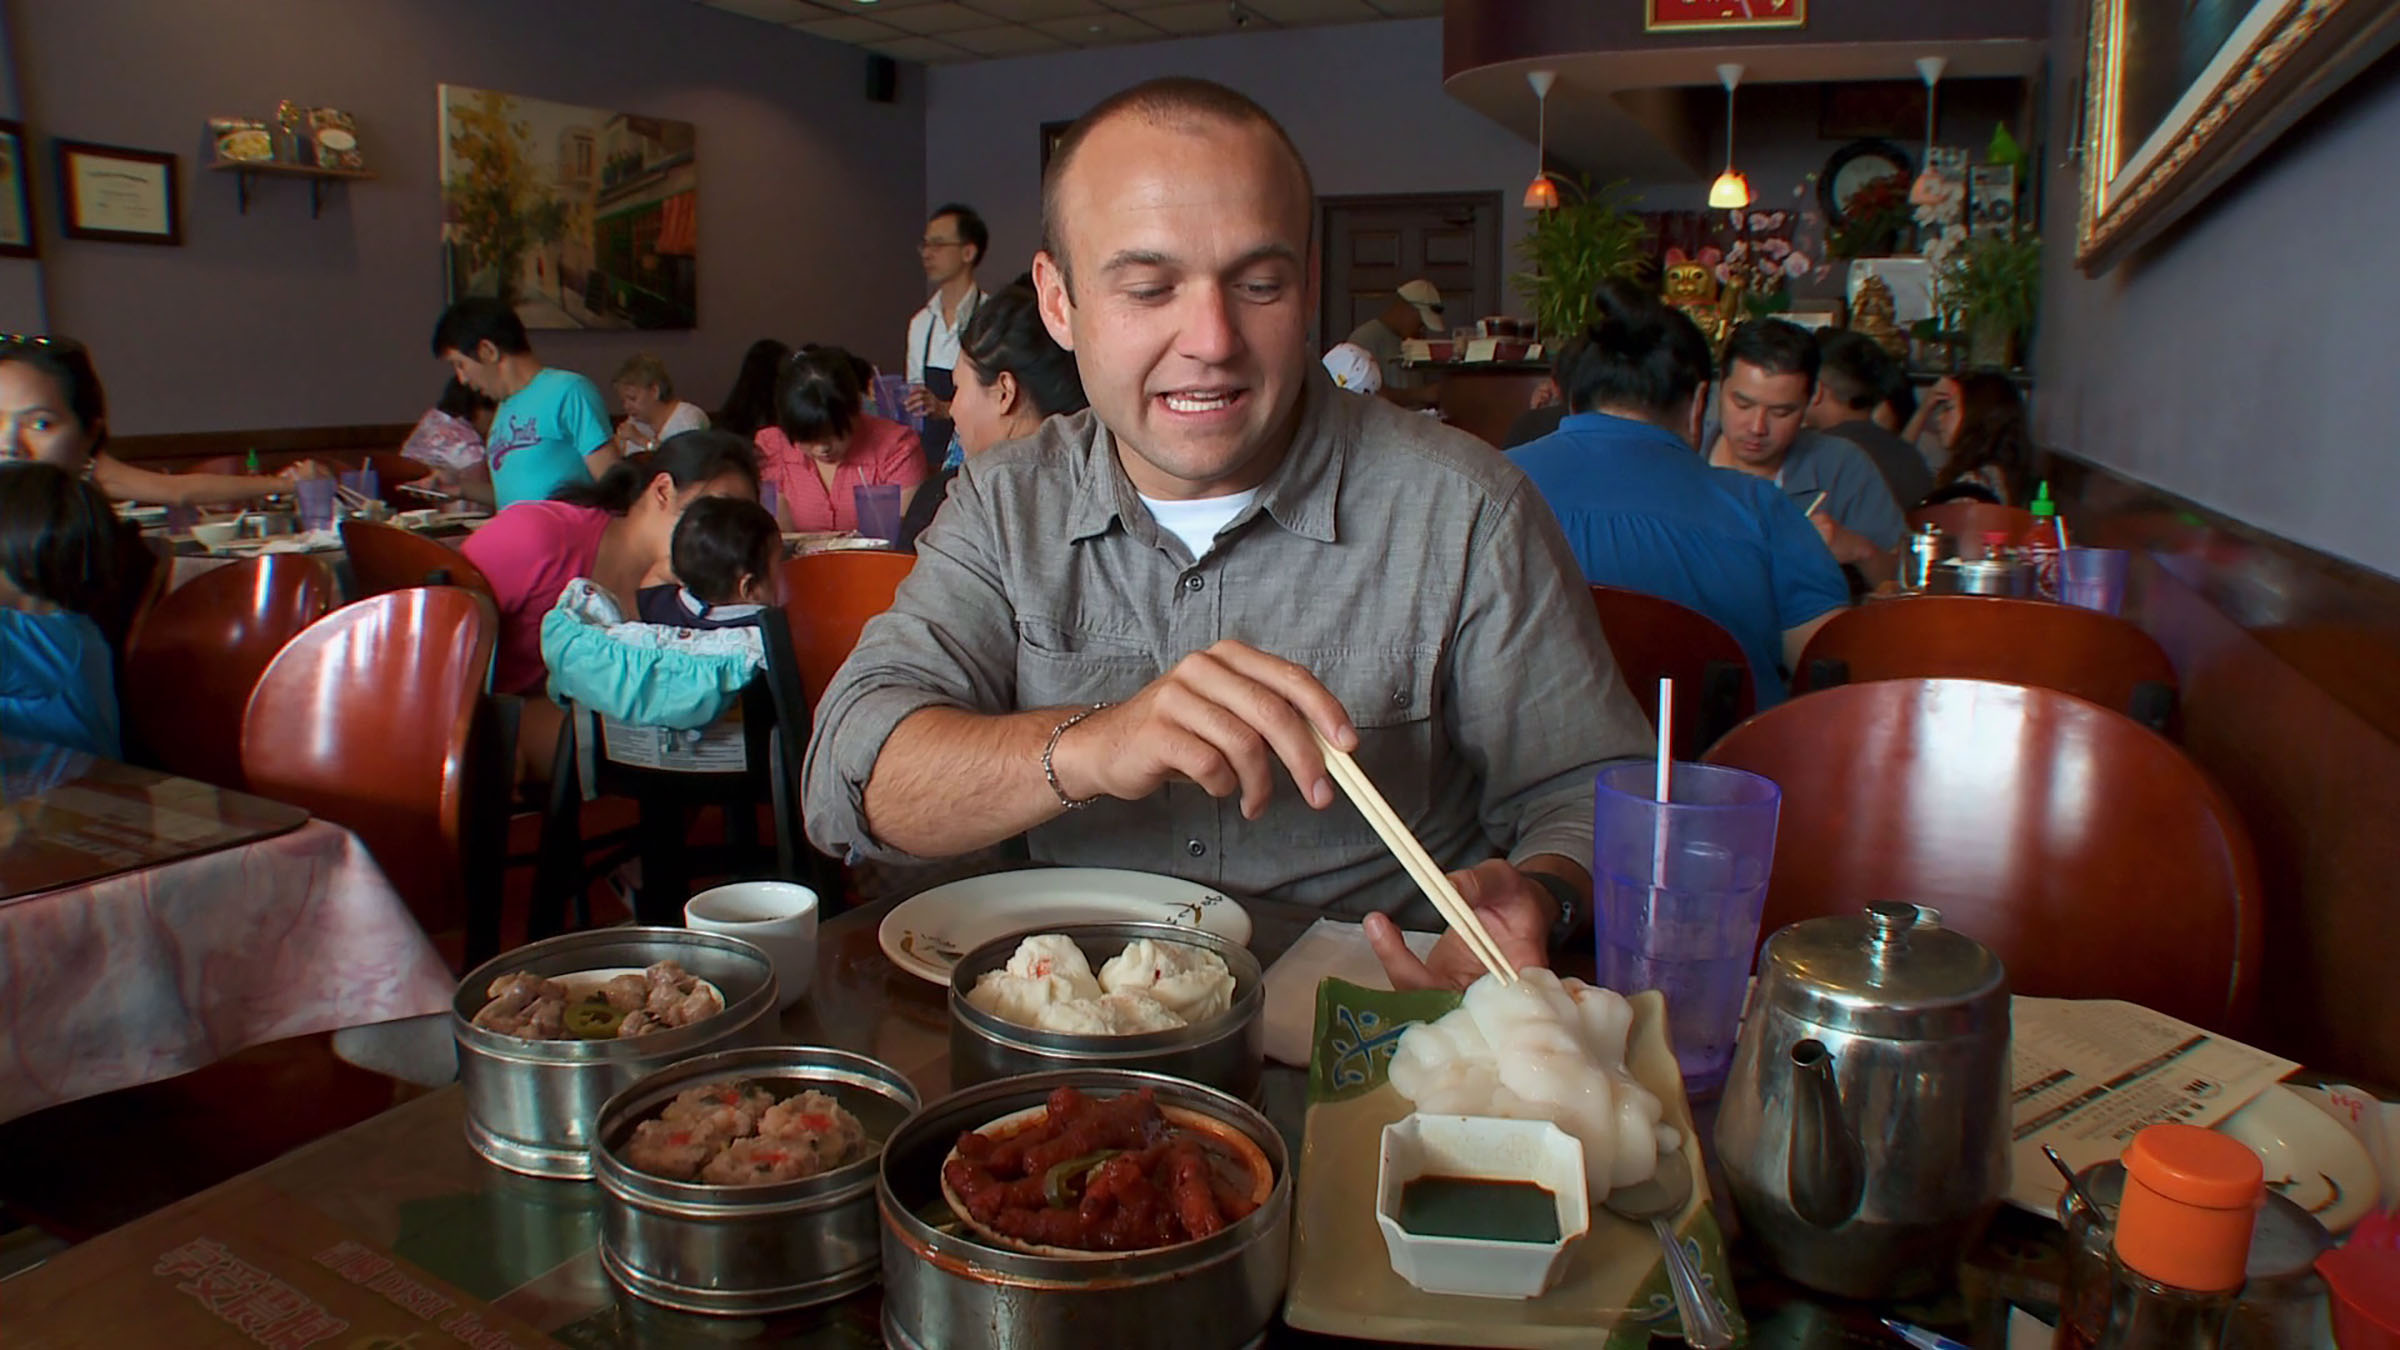 A man in a gray shirt smiles while poking a dumpling with chopsticks